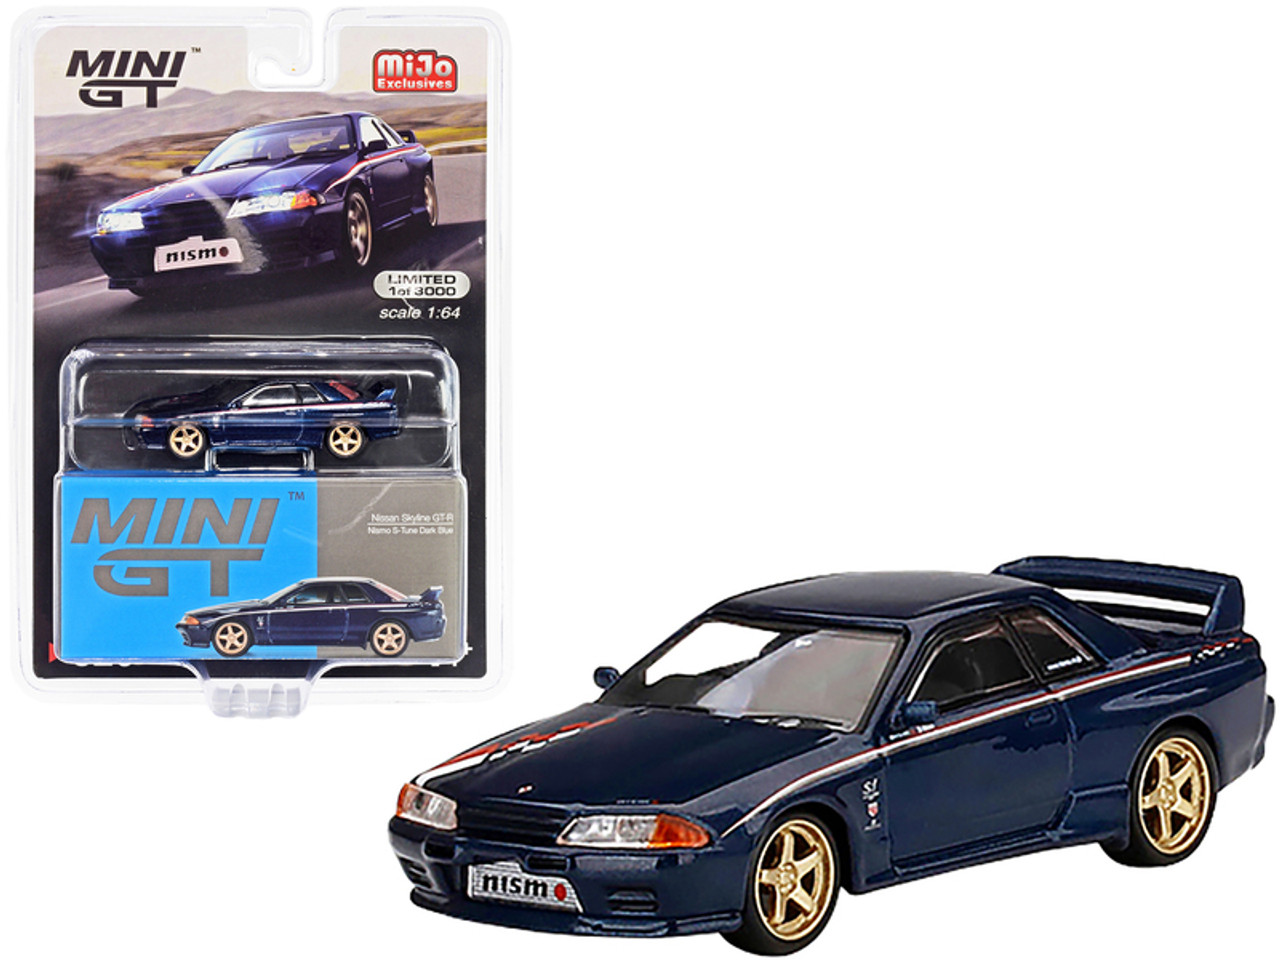 Nissan Skyline GT-R (R32) Nismo S-Tune RHD (Right Hand Drive) Dark Blue  Metallic with Stripes Limited Edition to 3000 pieces Worldwide 1/64 Diecast  Model Car by True Scale Miniatures